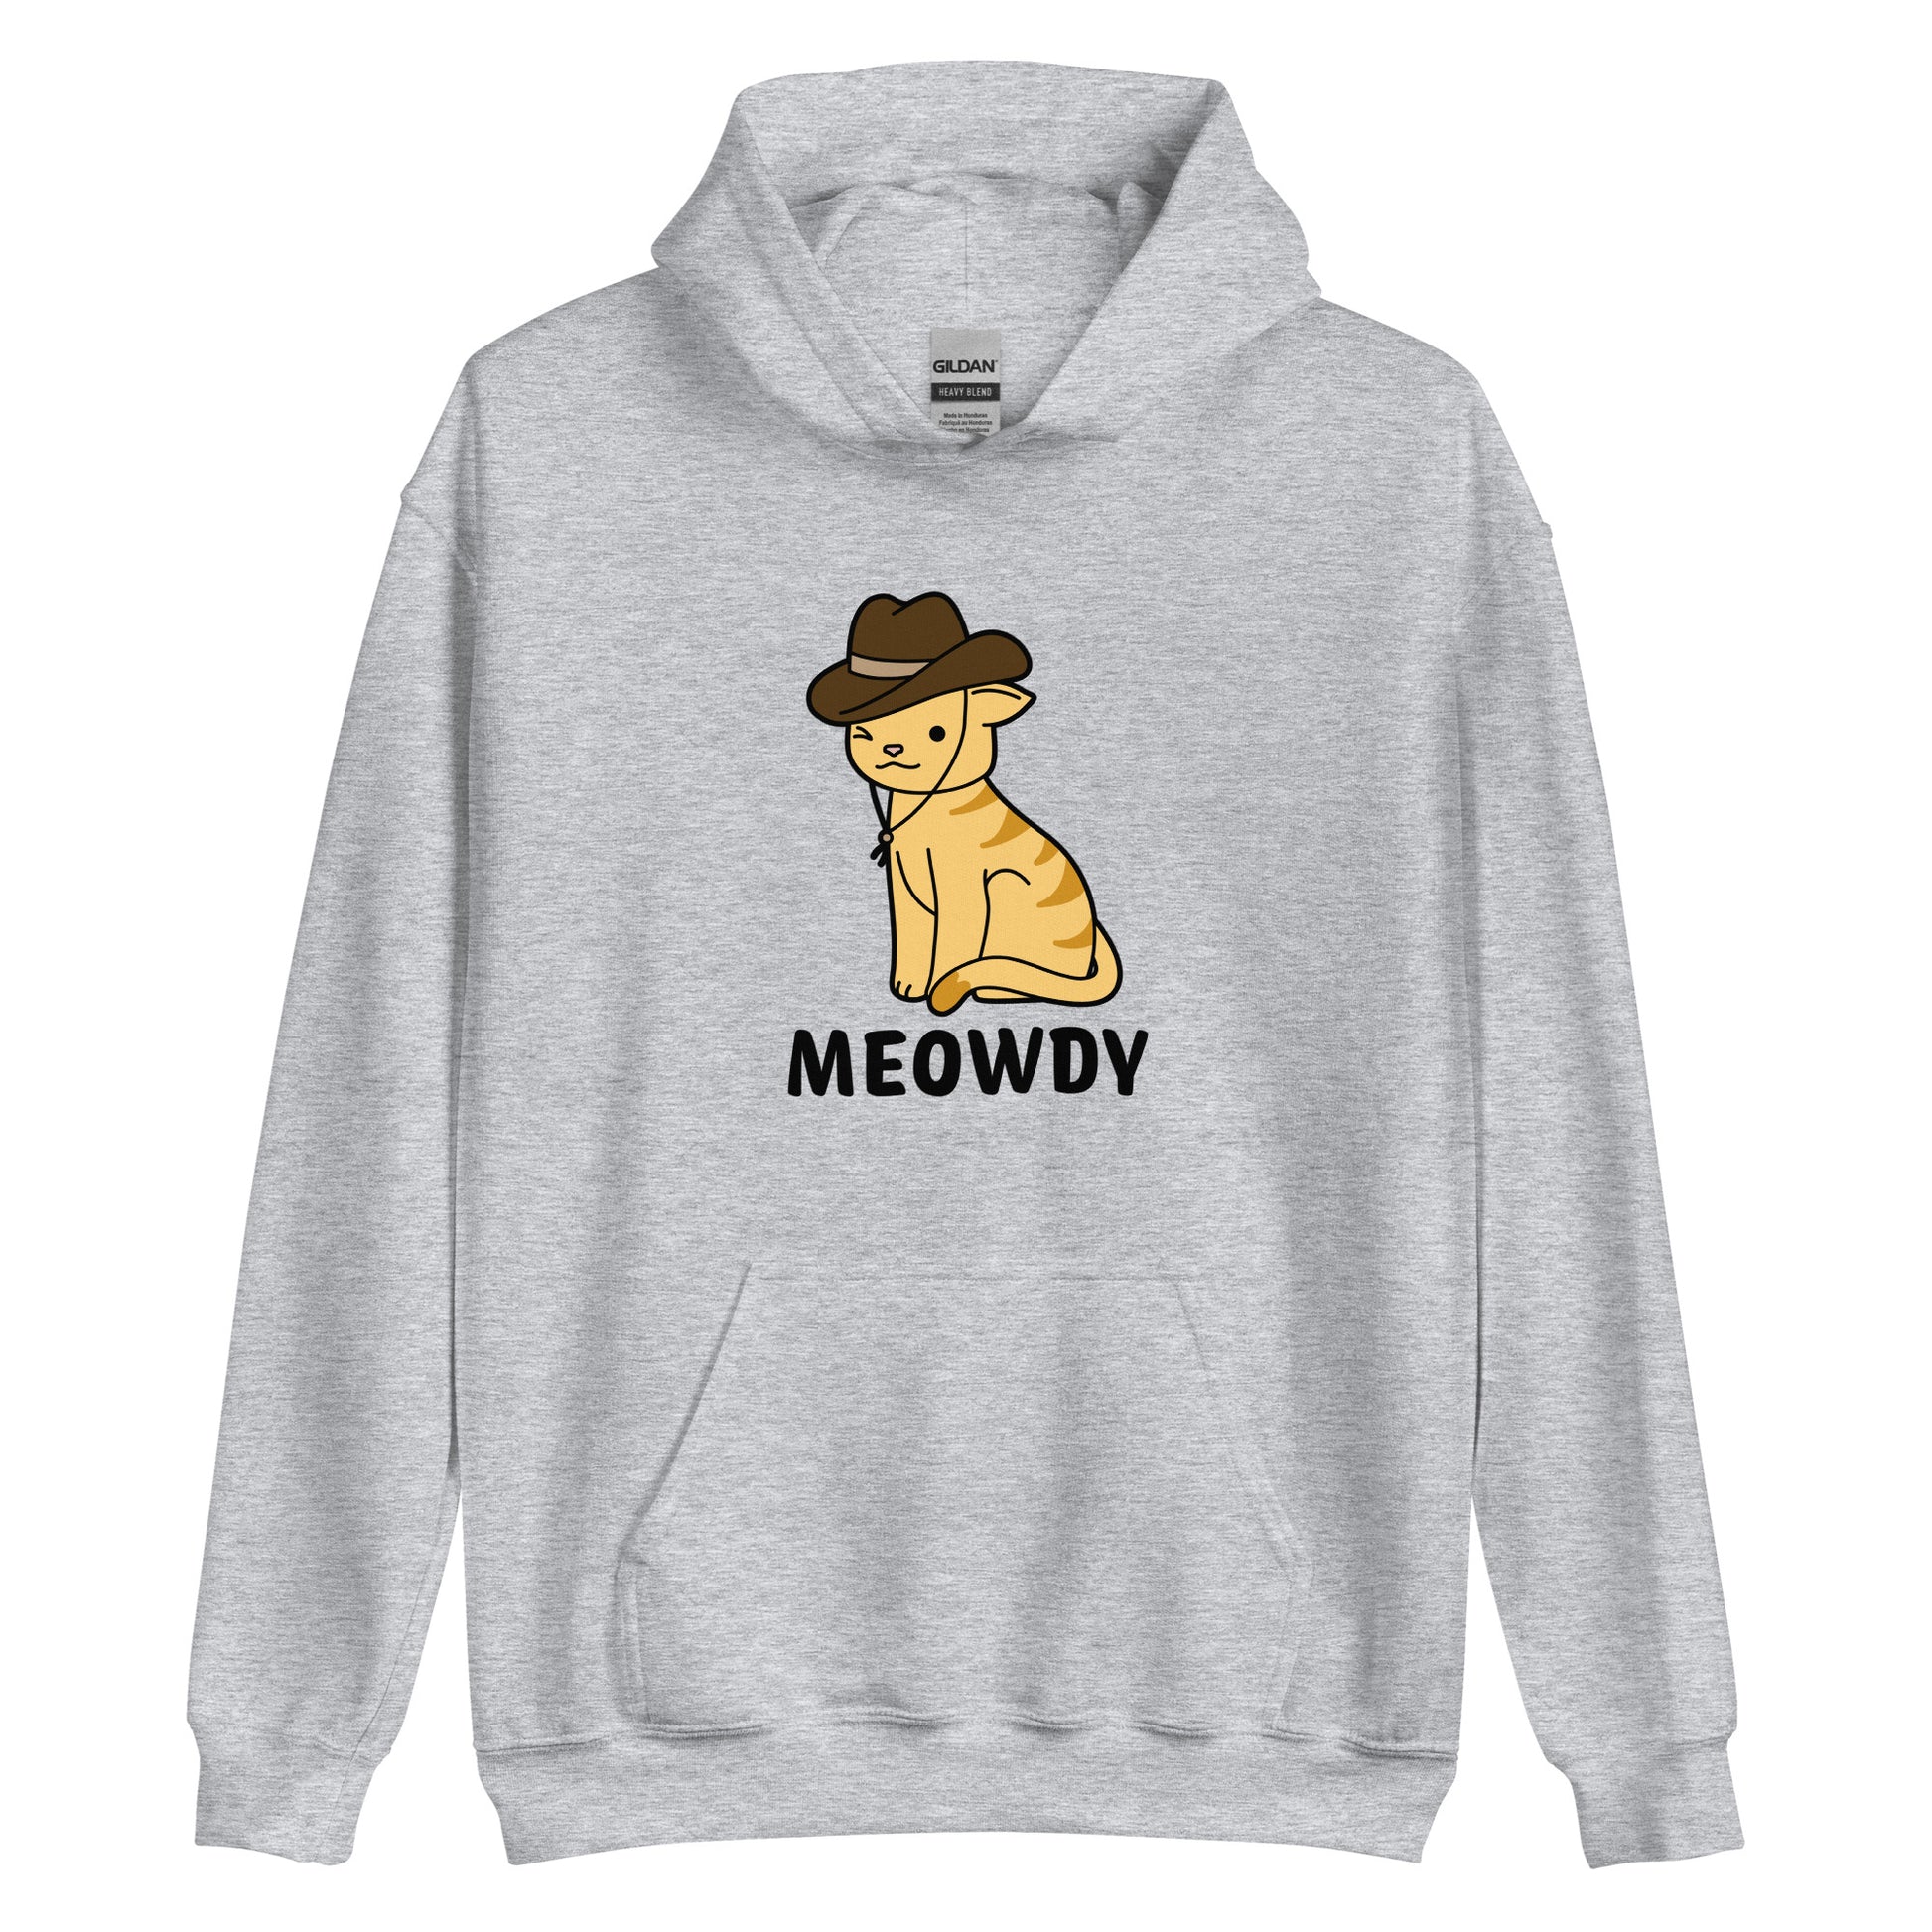 A grey hooded sweatshirt featuring a cartoon drawing of an orange striped cat. The cat is winking and wearing a cowboy hat. Text beneath the cat reads "Meowdy"